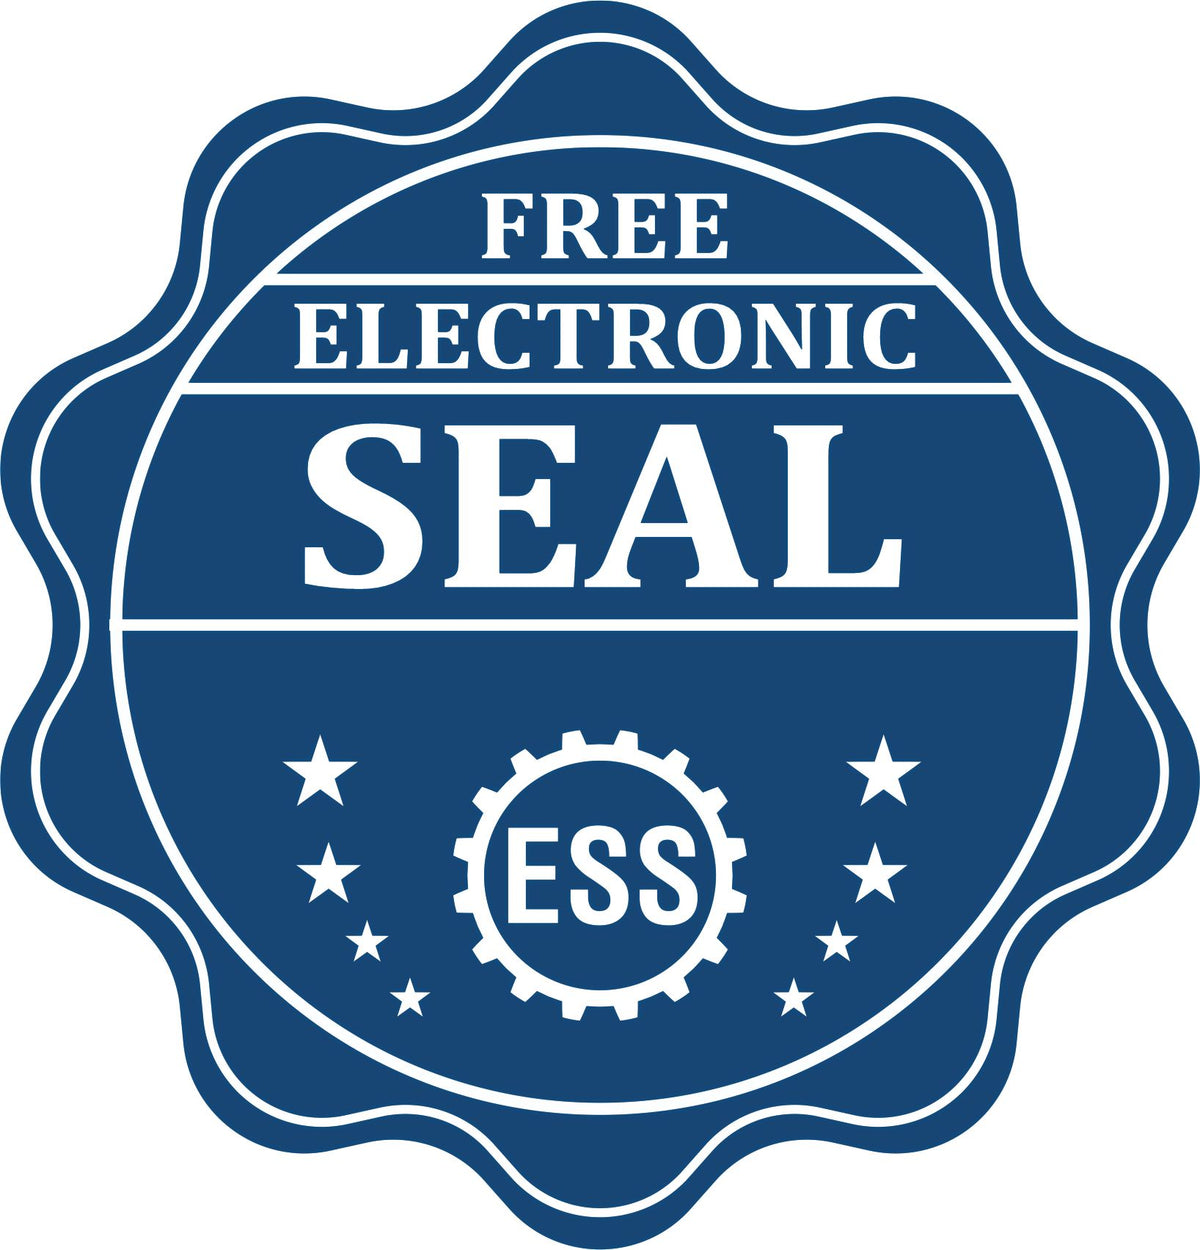 A badge showing a free electronic seal for the MaxLight Premium Pre-Inked Guam Rectangular Notarial Stamp with stars and the ESS gear on the emblem.